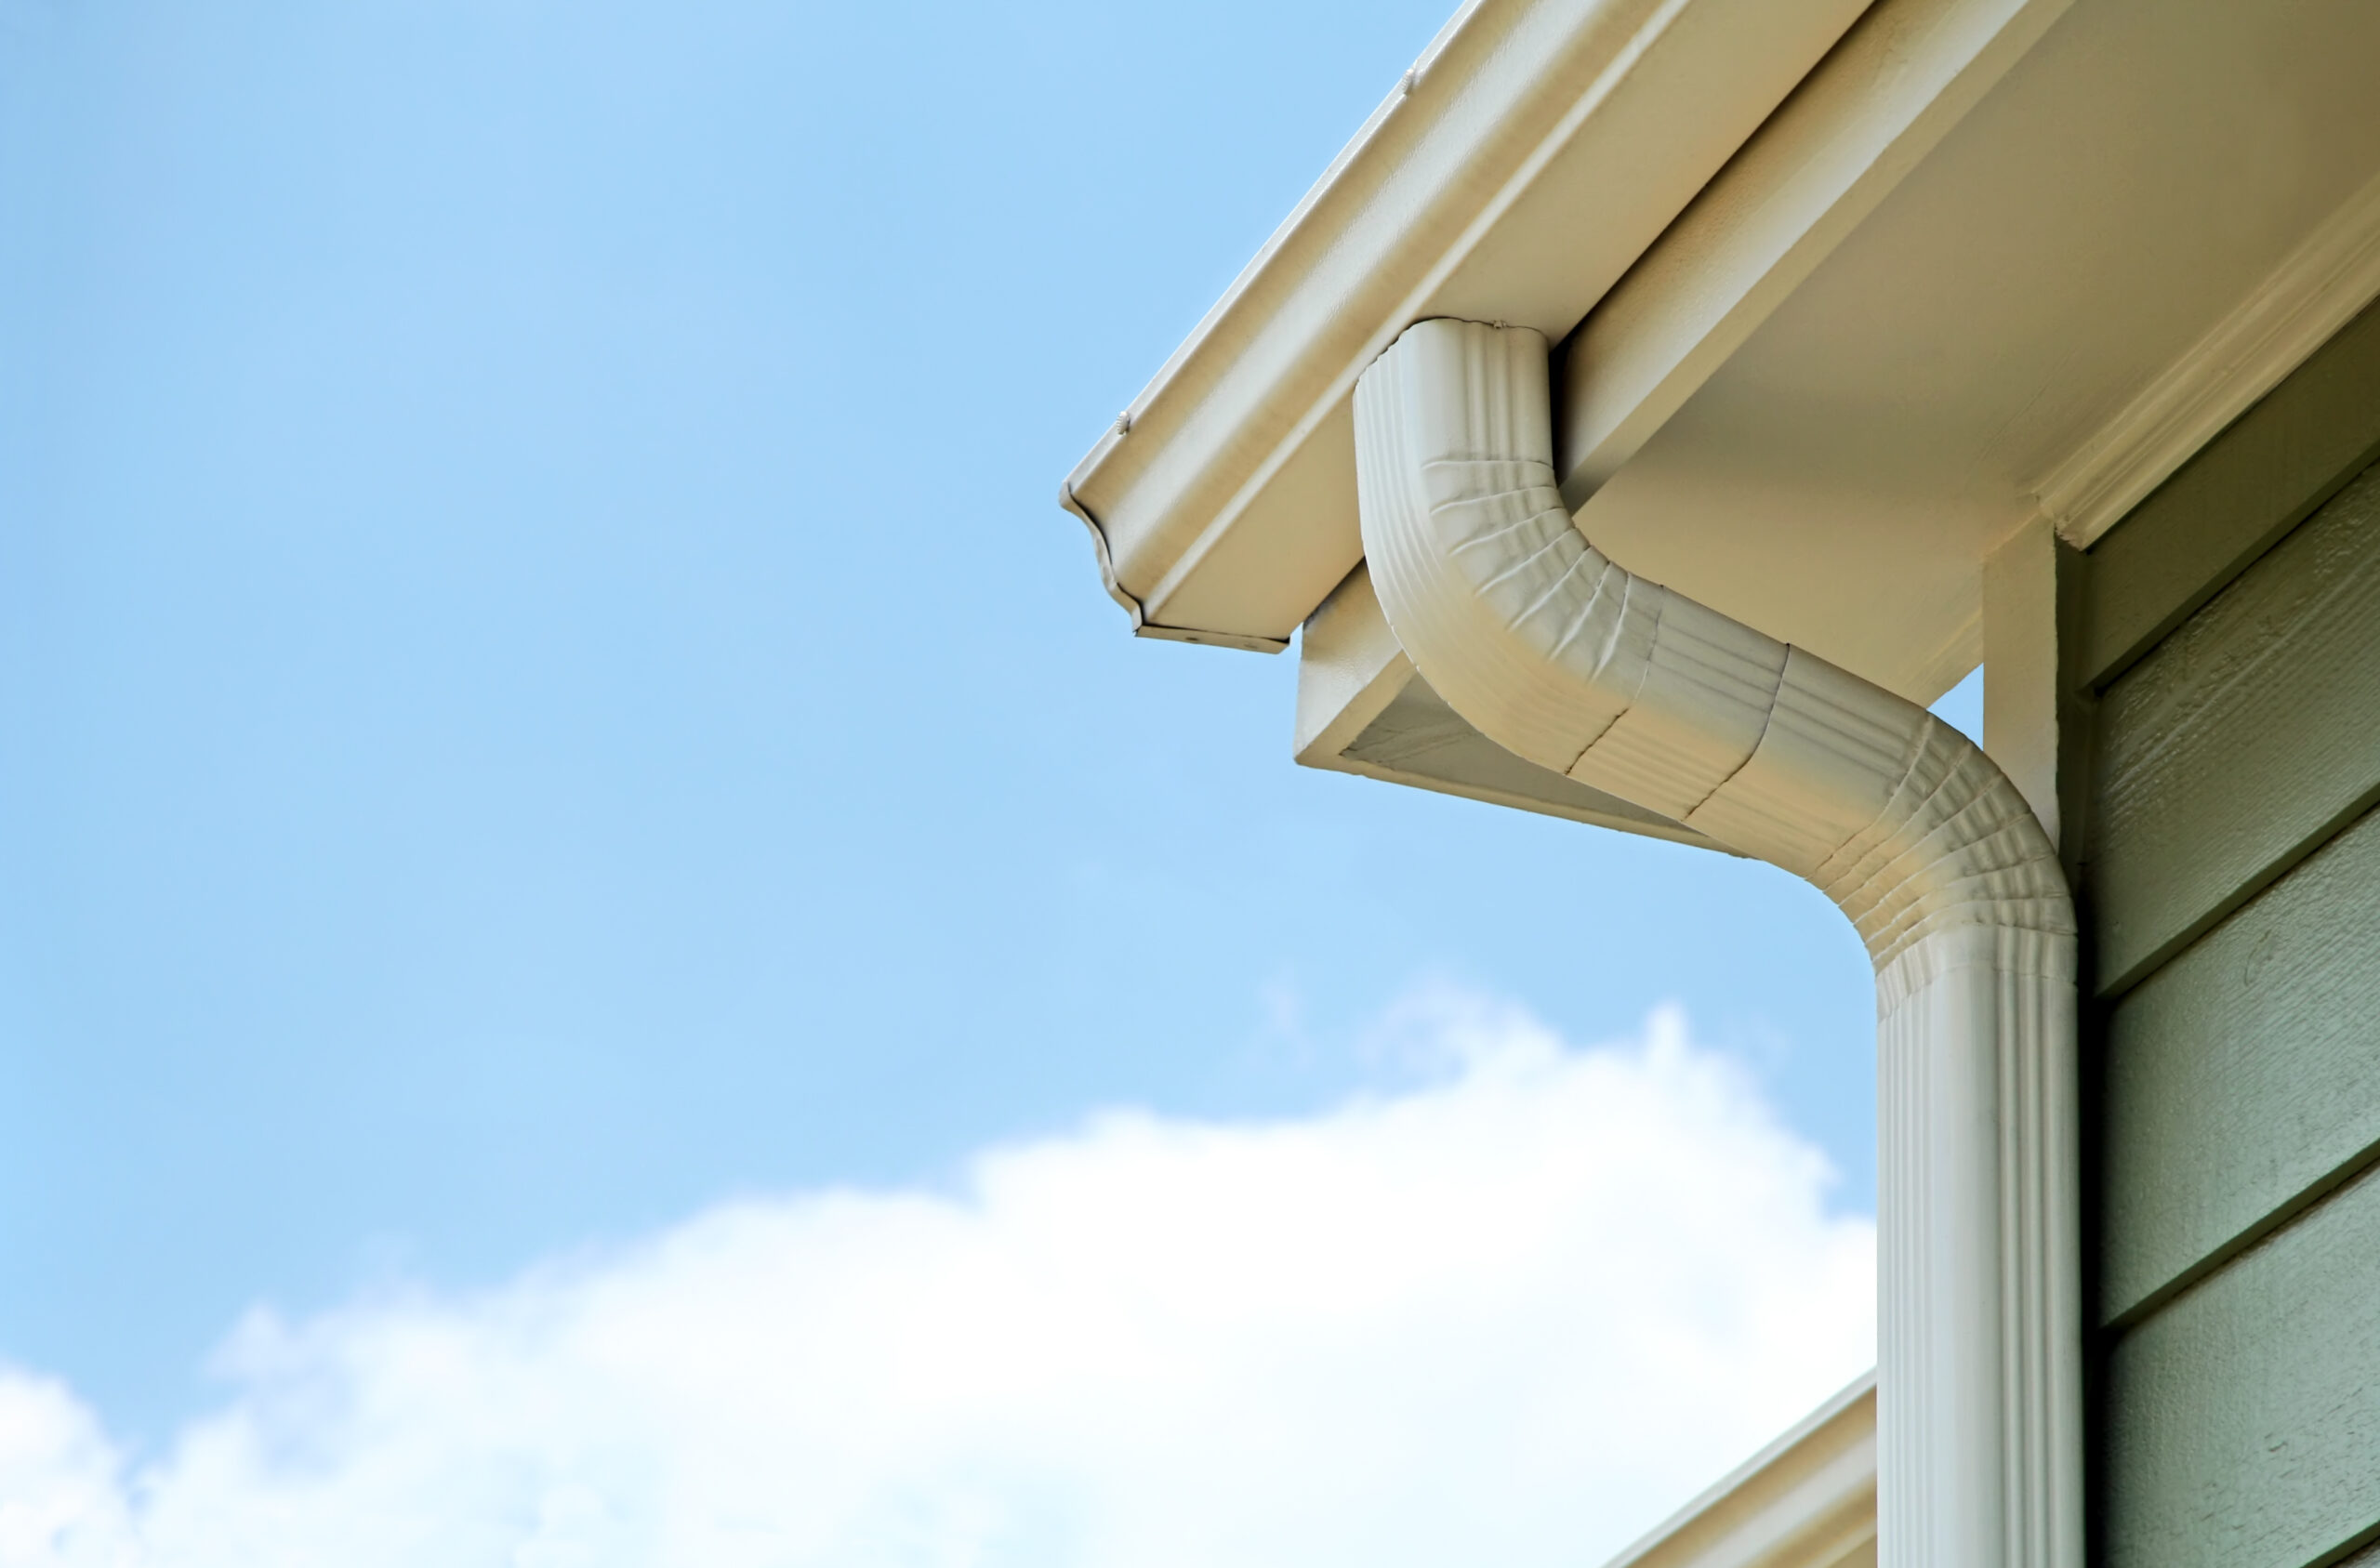 A gutter and downspout installed along the roof of a residential home.